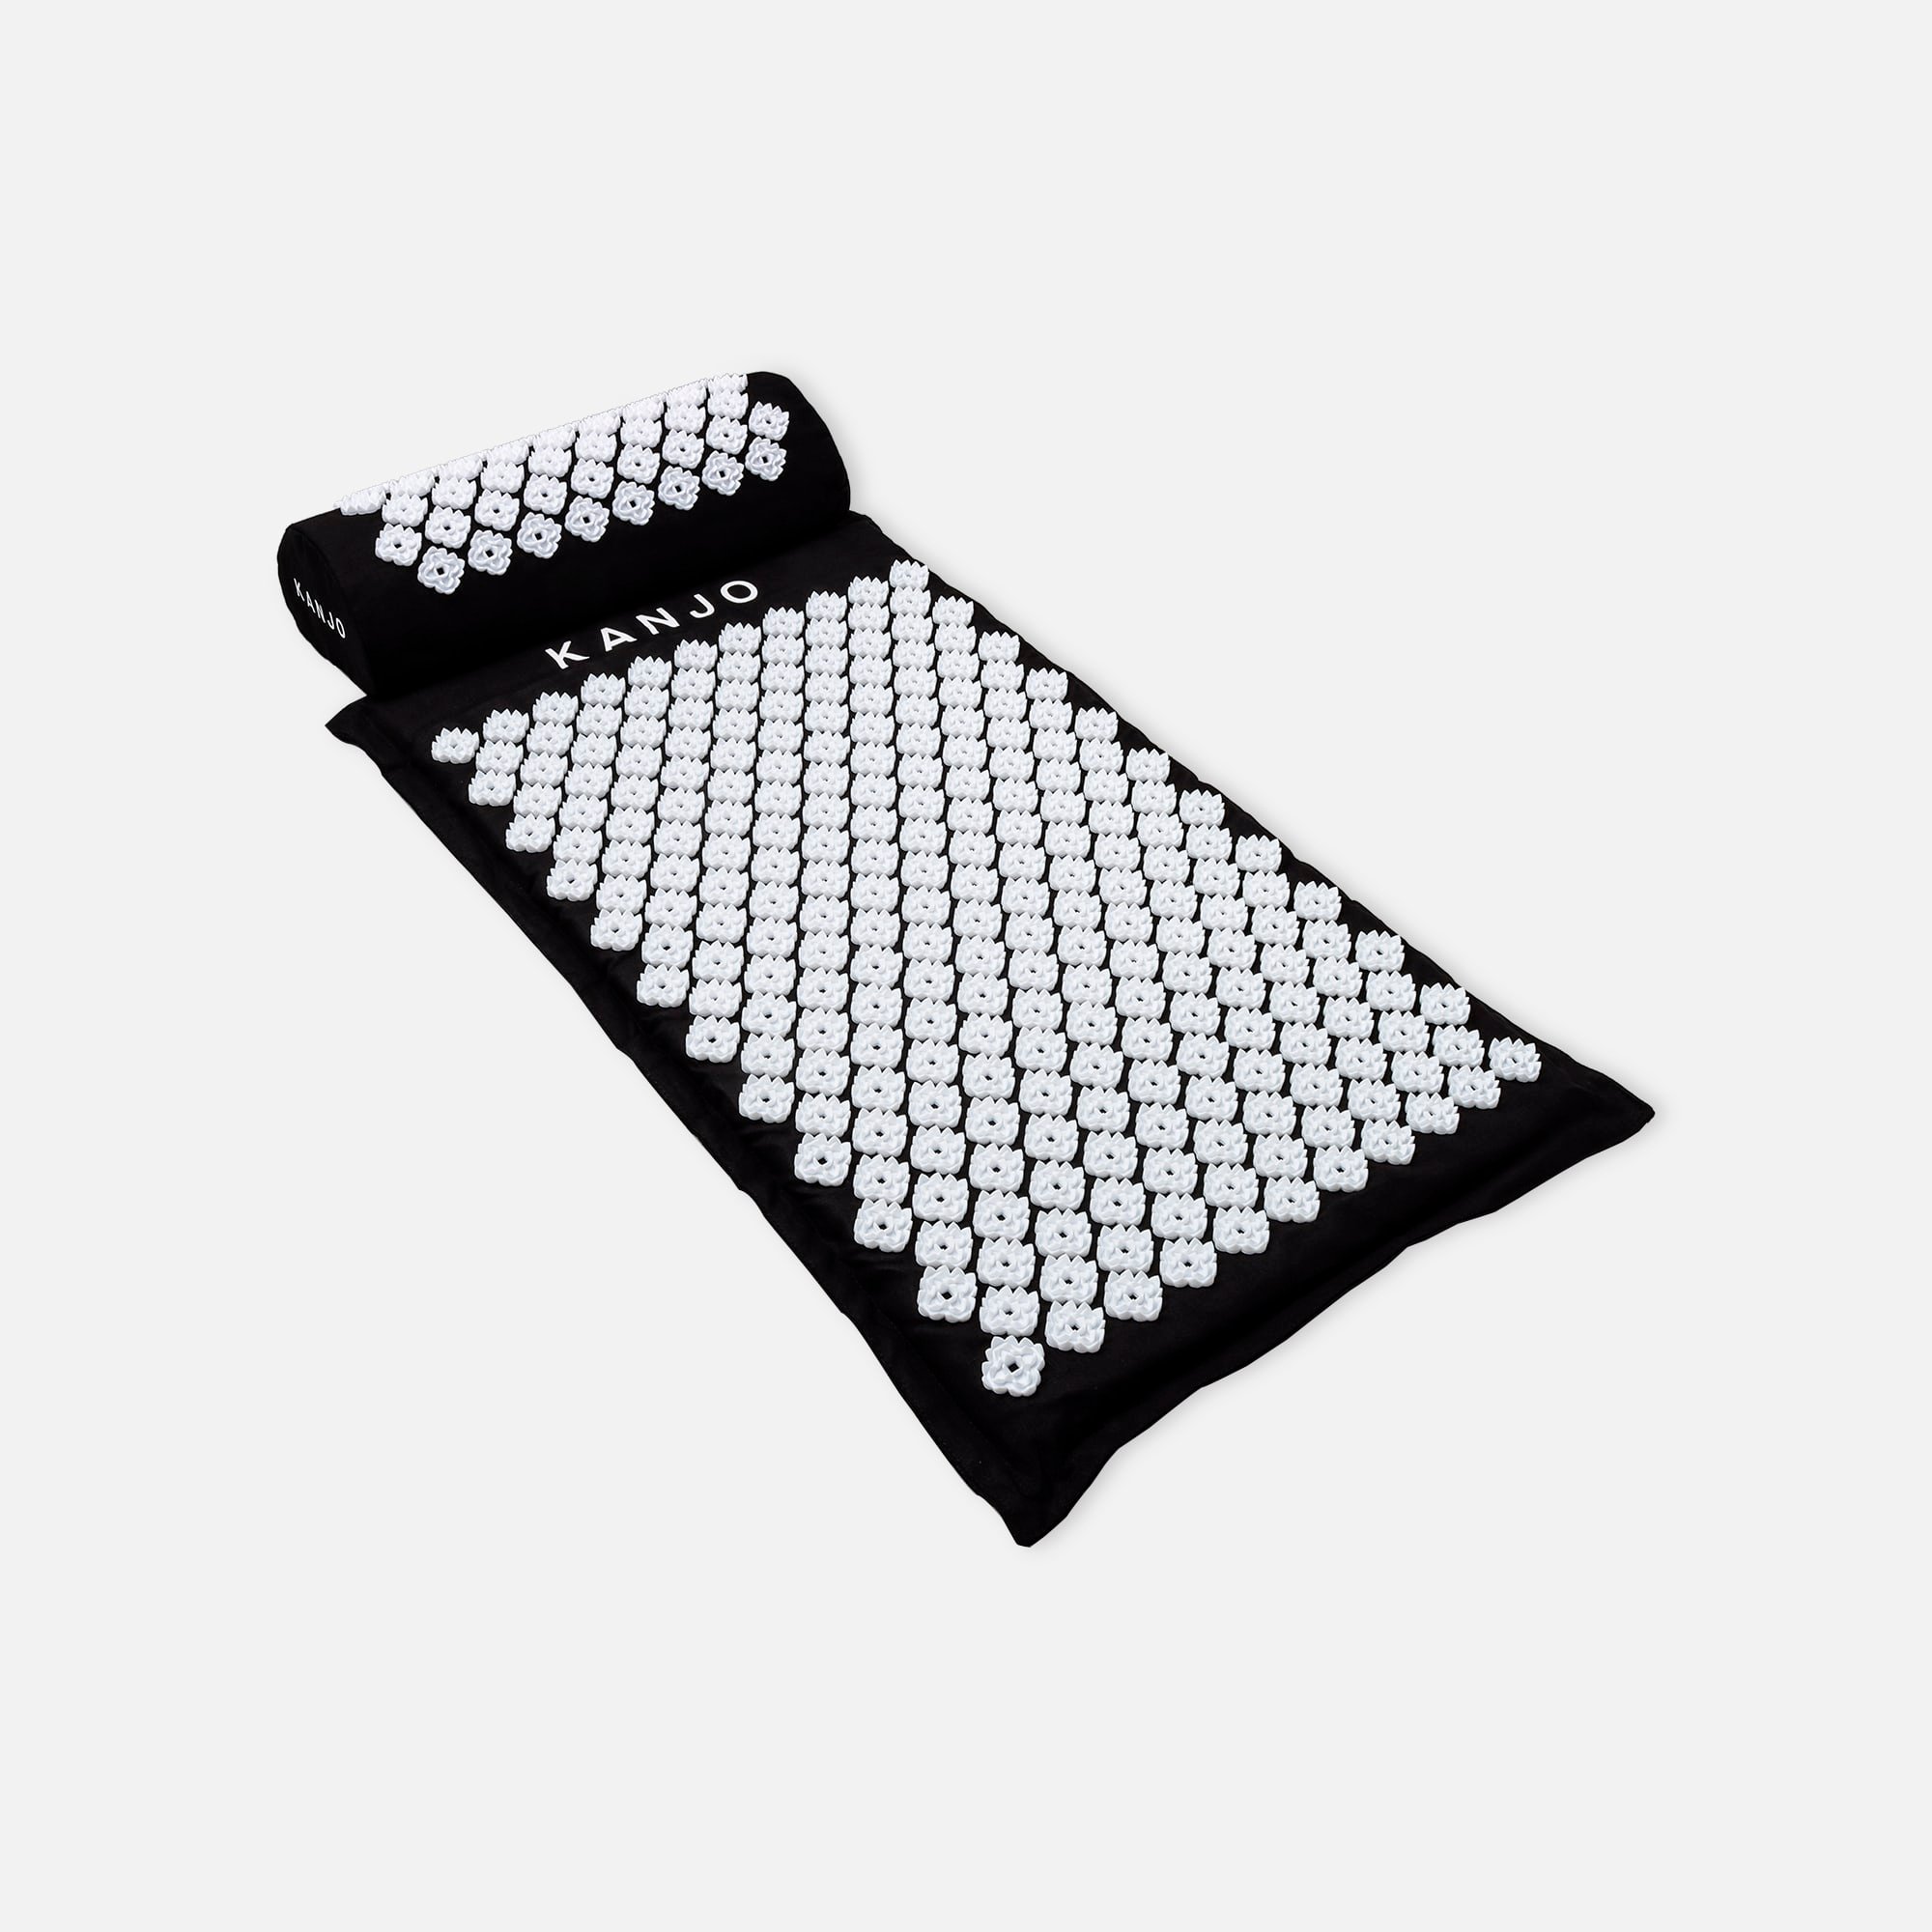 Beautyqueenuk | A UK Beauty and Lifestyle Blog: BED OF NAILS ACUPRESSURE MAT